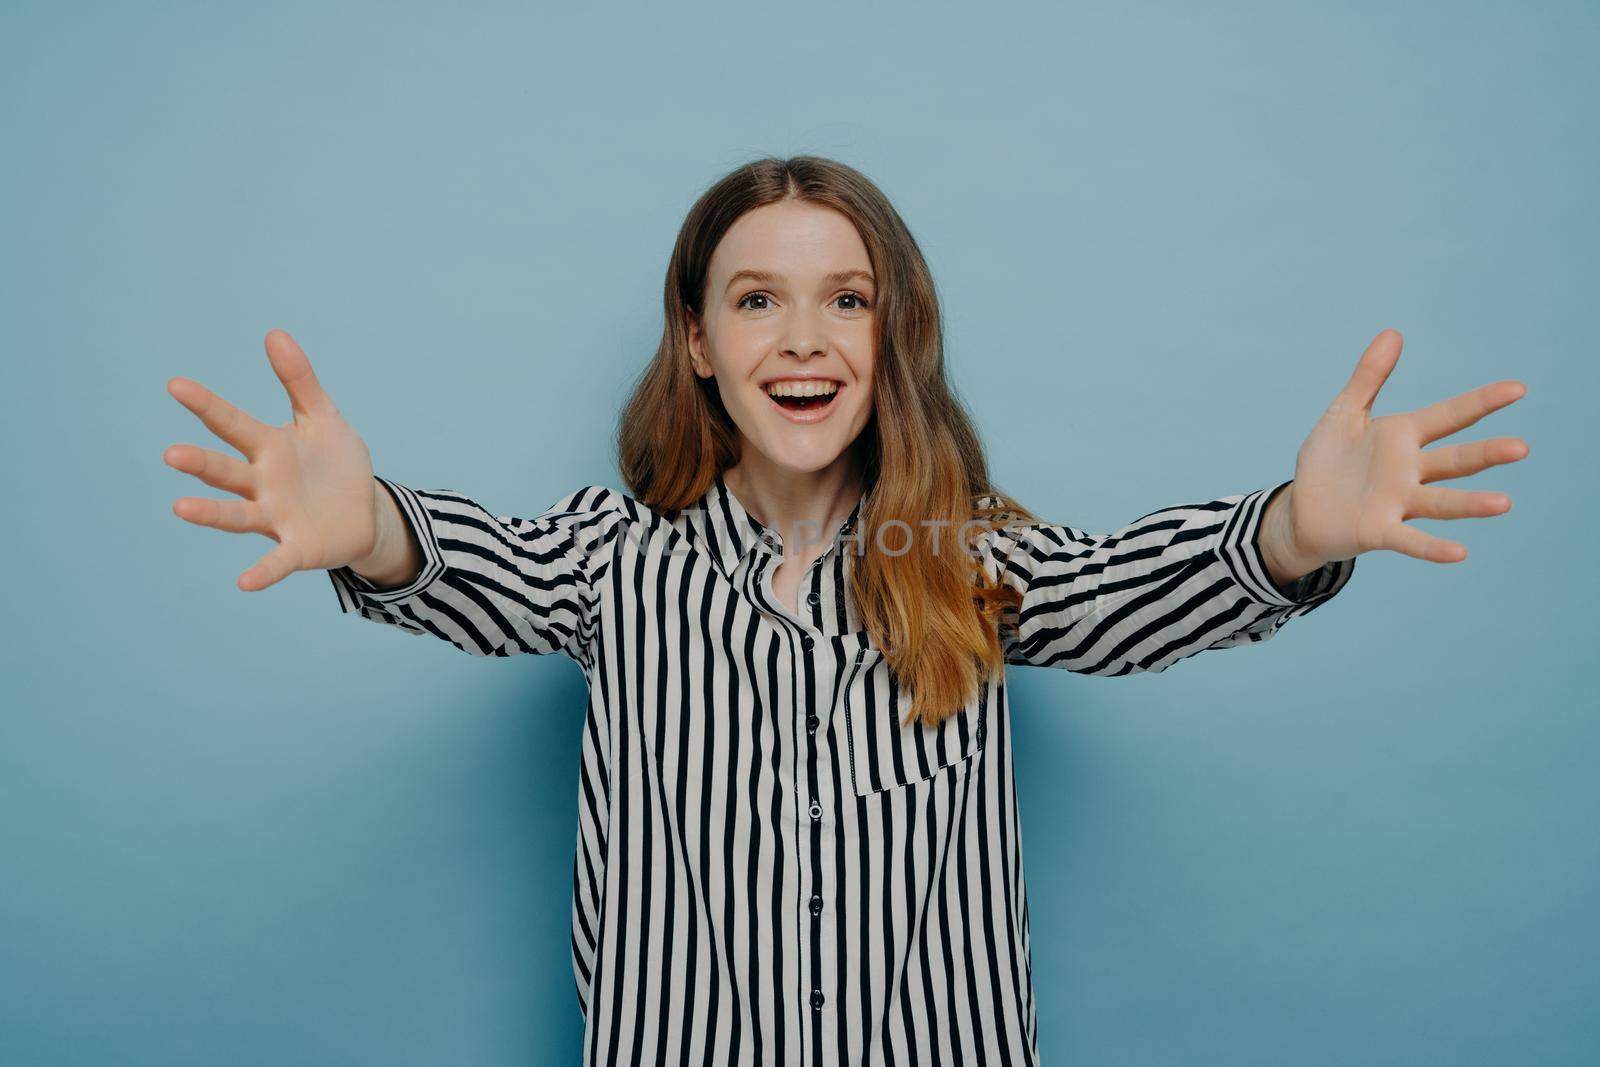 Come here. Young friendly teenage girl giving warm hug to friend while posing against blue wall, looking at camera joyfully and smiling, expressing love and positiveness. Body language concept